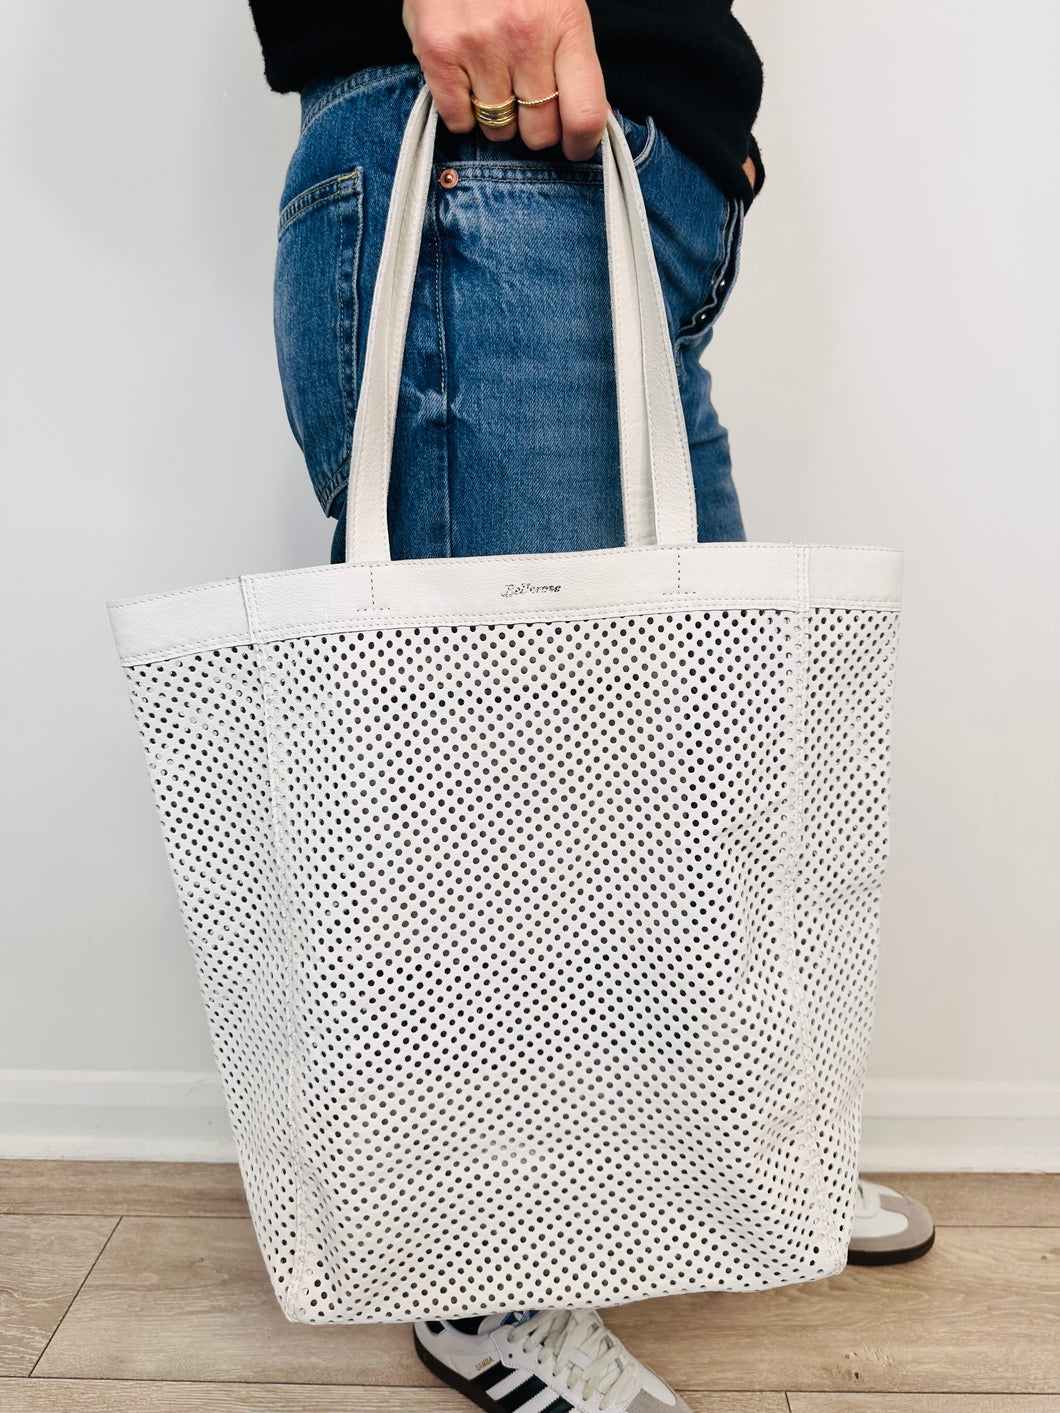 Perforated Leather Tote